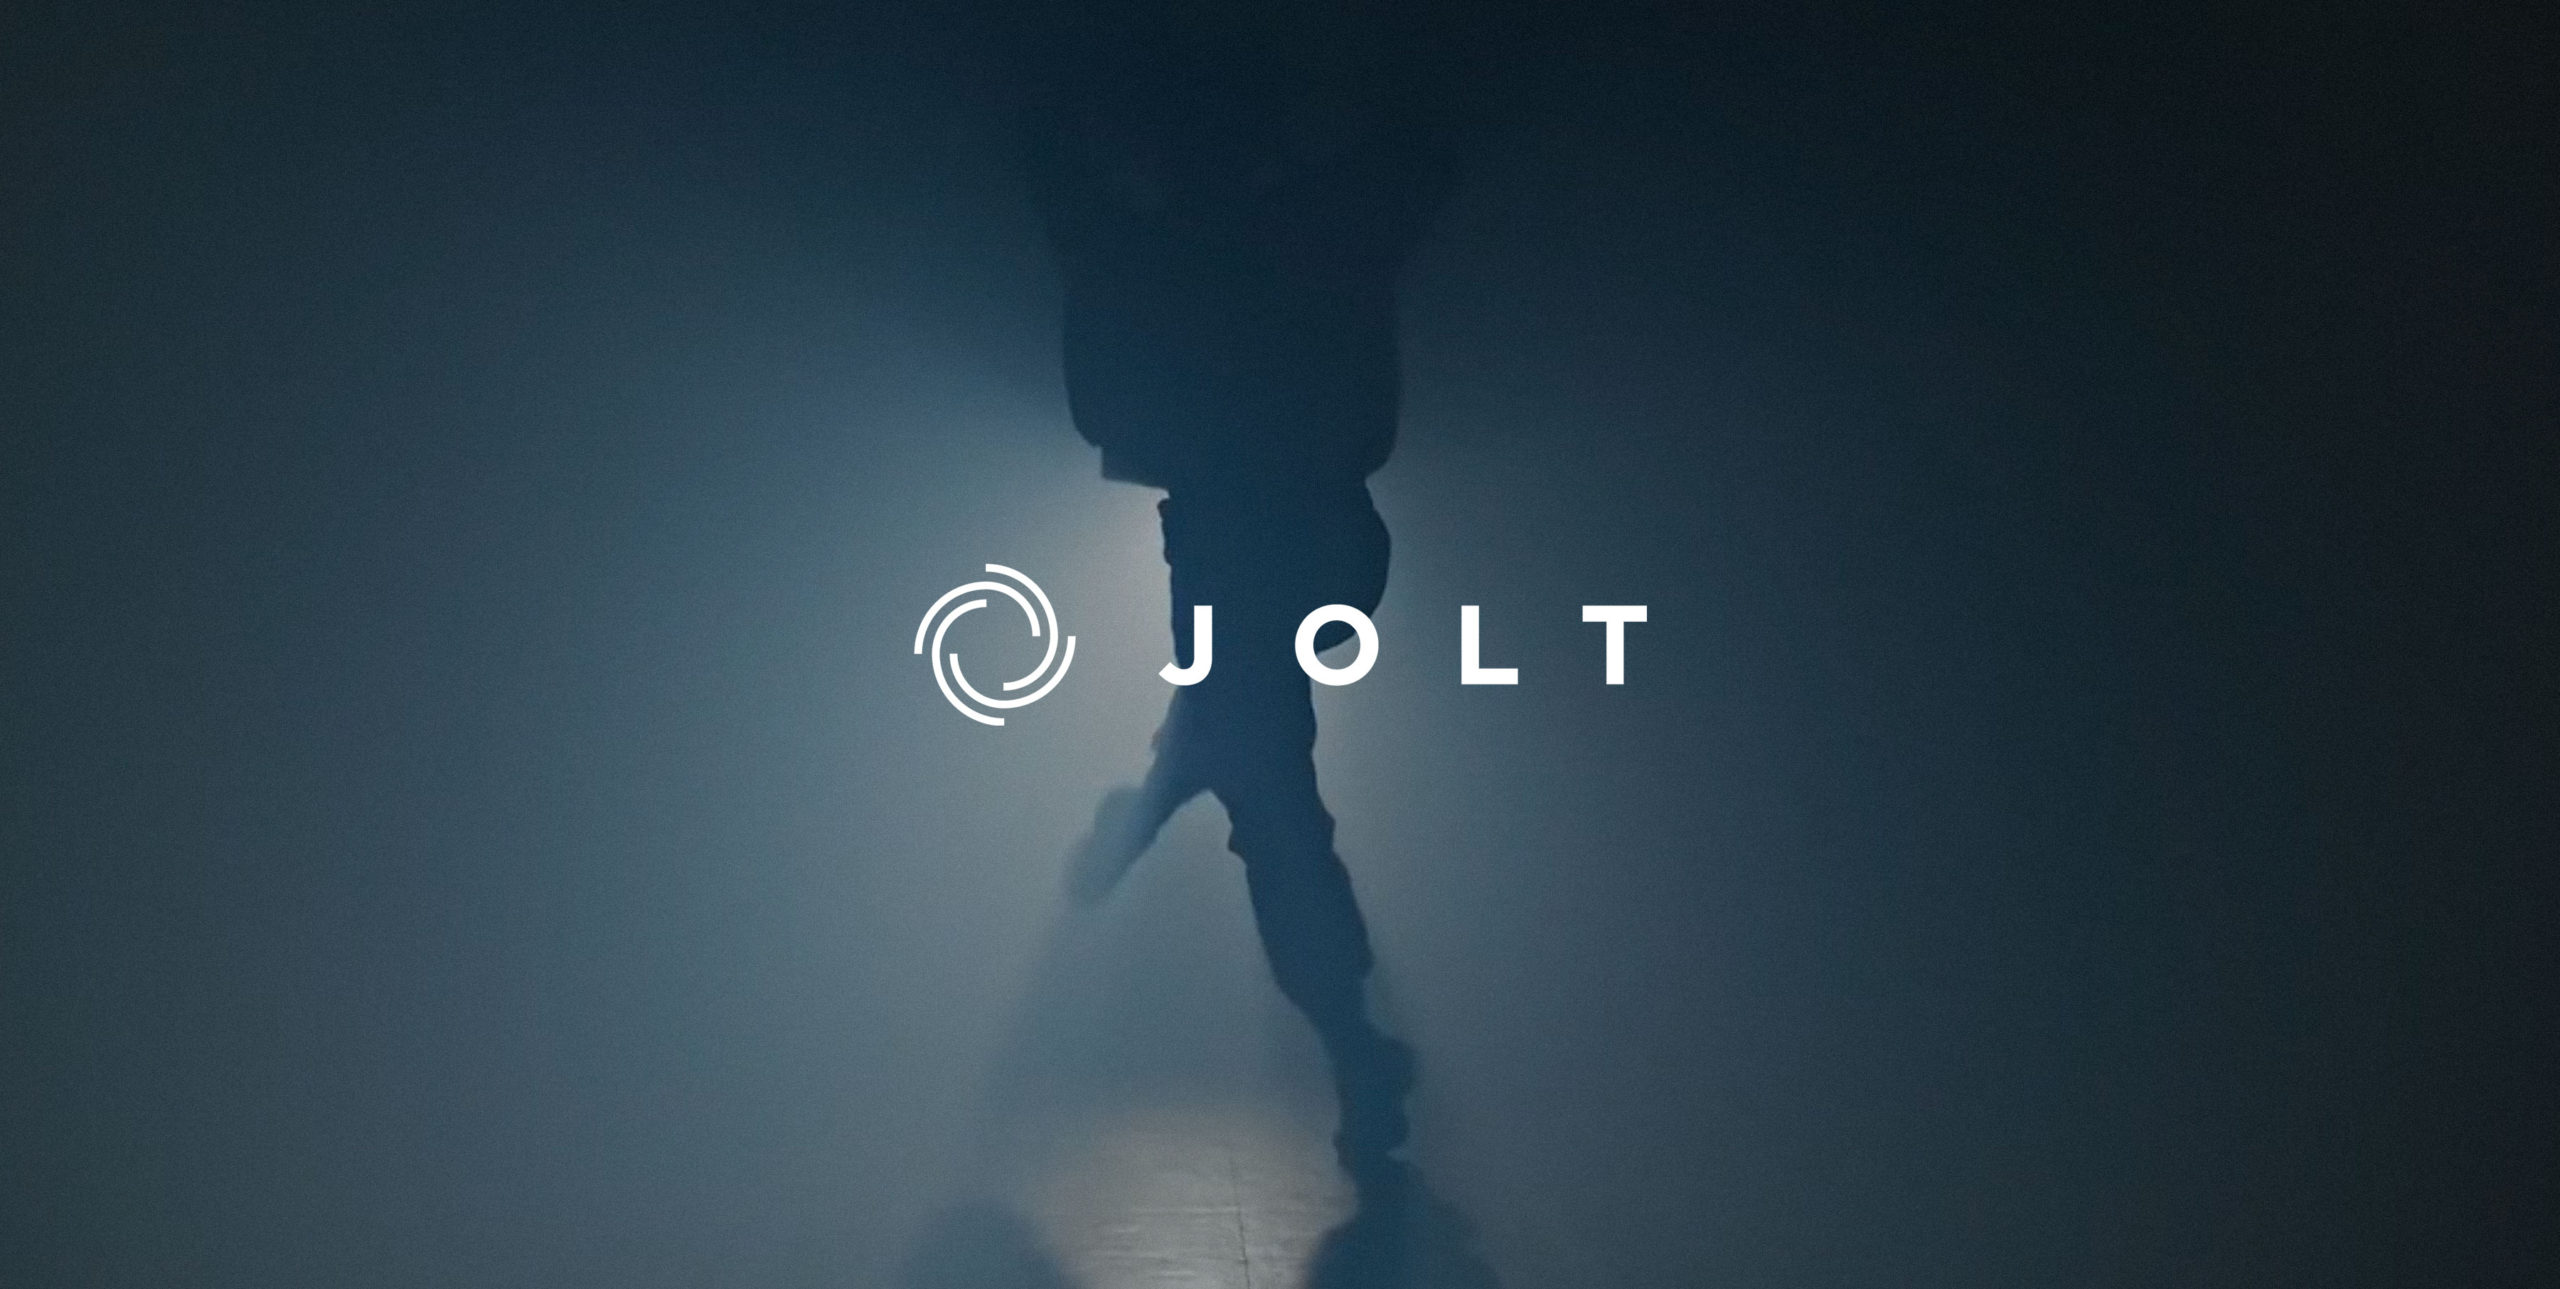 Man dancing in background with JOLT brandmark displayed above a black opacity